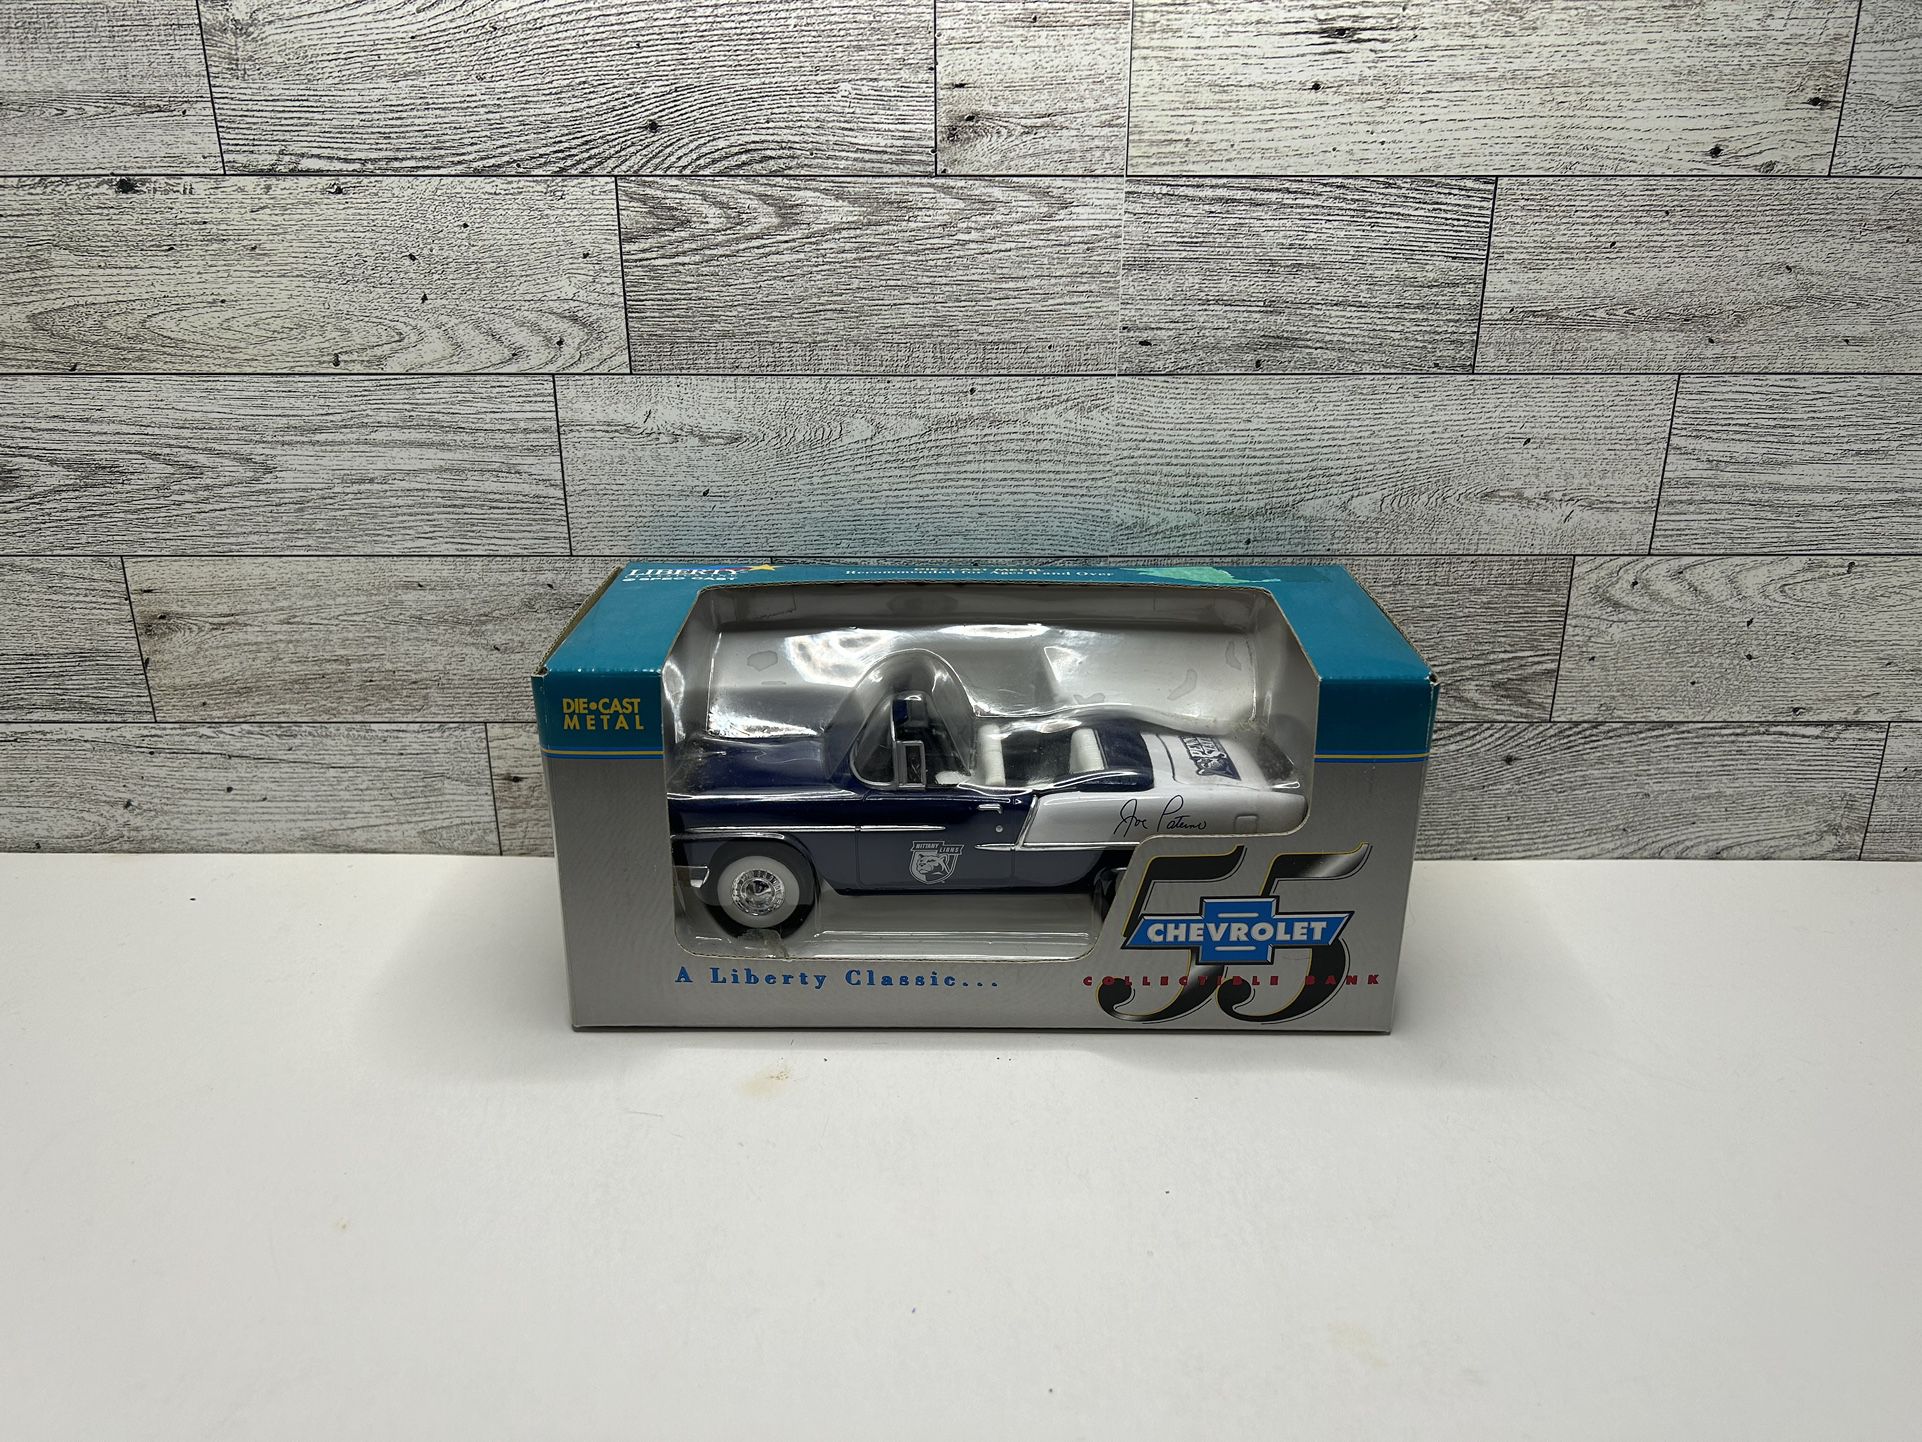 LIBERTY Classics Blue ‘1955 Chevrolet Convertible Bank  • Die Cast Metal • Made in China   